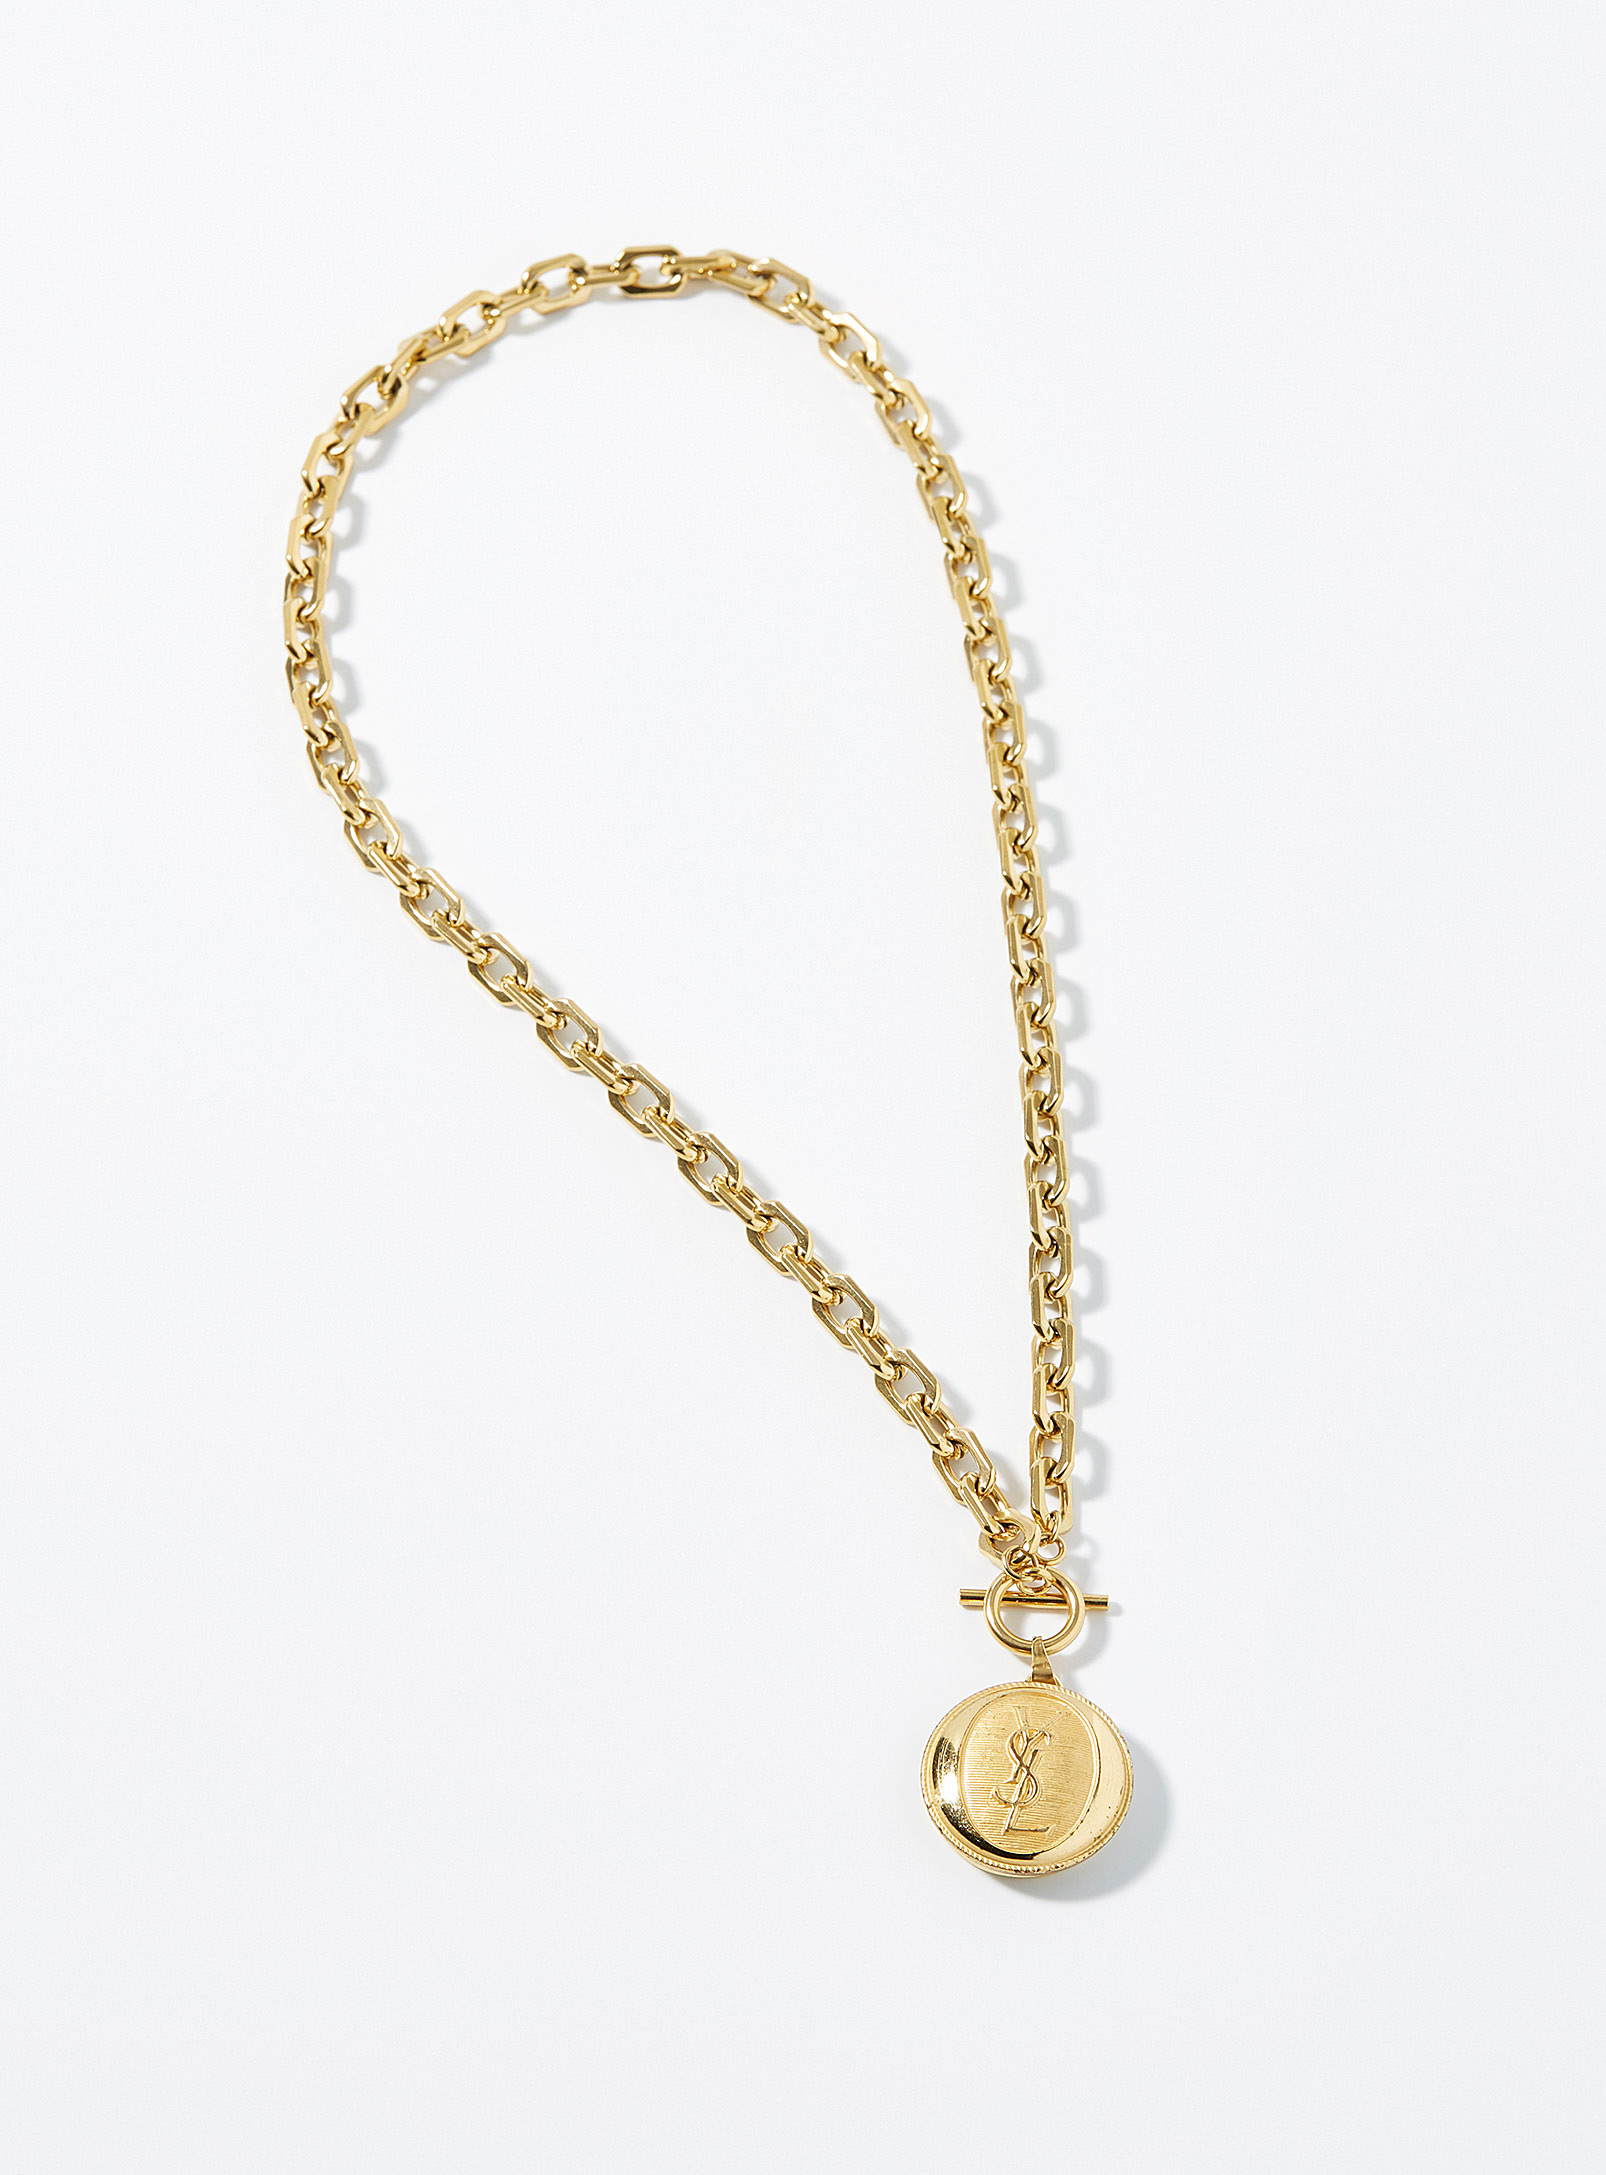 Luxury Story Yves Saint Laurent Medallion Upcycled Chain In Gold